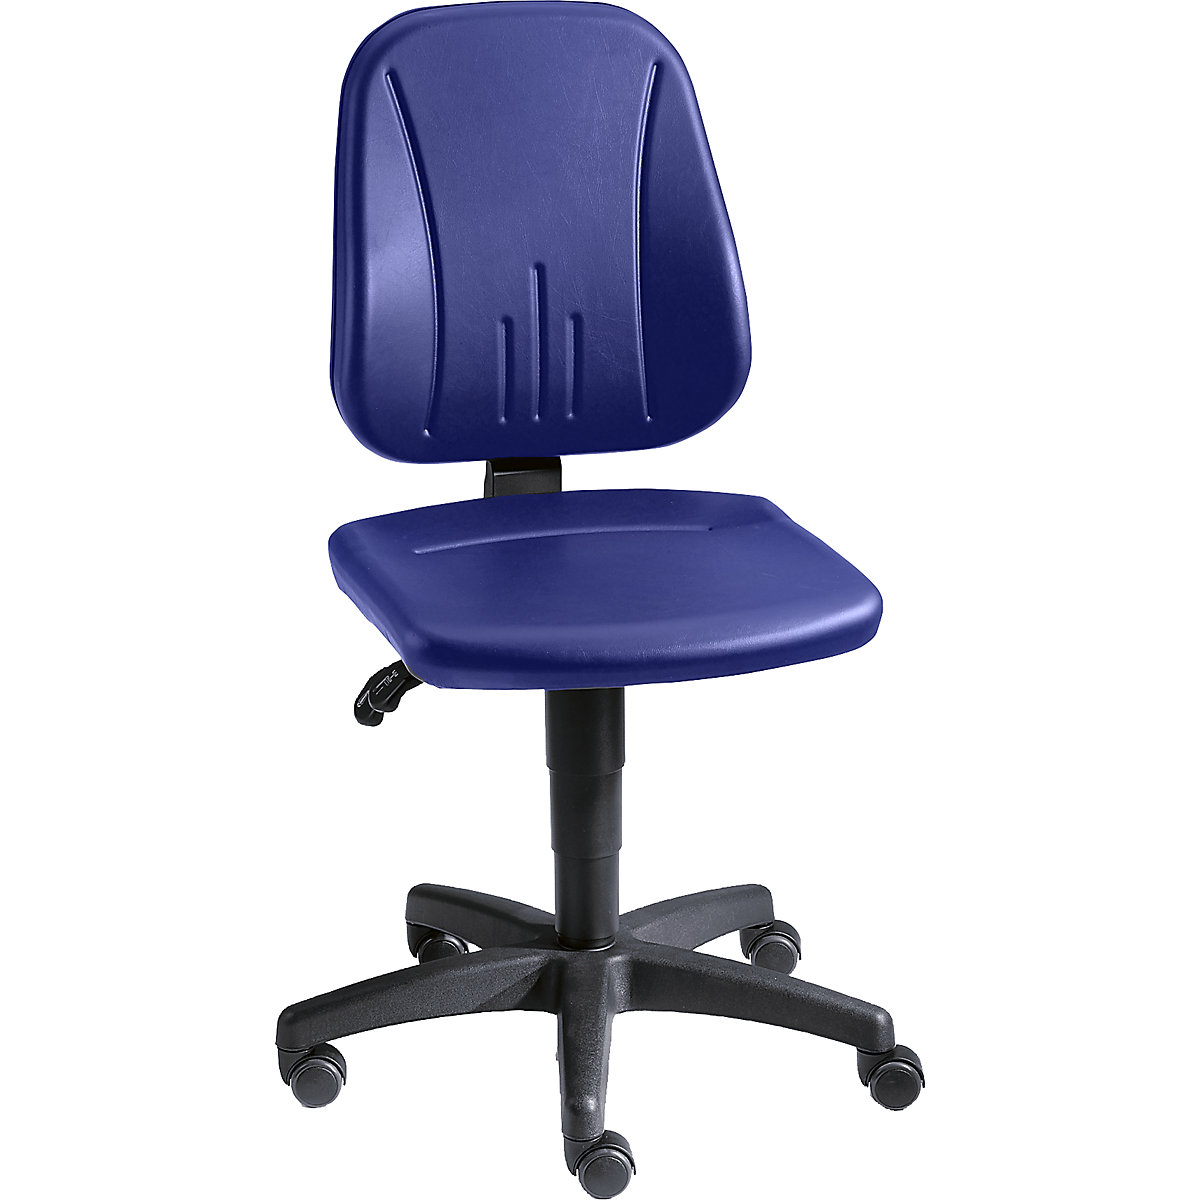 Industrial swivel chair – bimos, with gas lift height adjustment, vinyl cover, blue, with castors-3